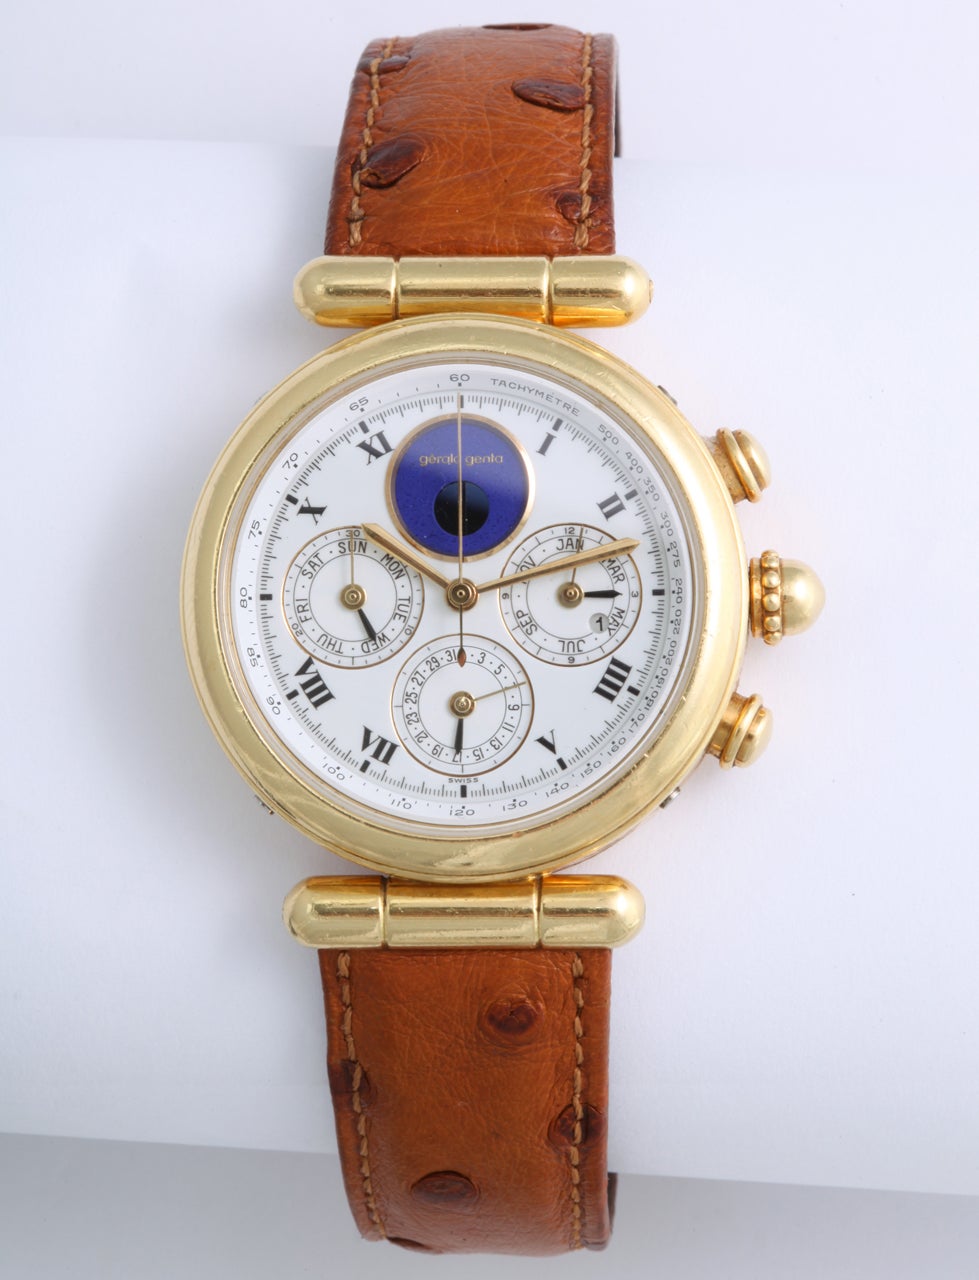 Gerald Genta 30 Year Perpetual Calendar Chronograph Wristwatch

Movement: Quartz
Case: 18k Yellow Gold
Dial: White with Roman Numerals
Functions: hours and minutes; perpetual calendar (date, day, month, moon phases, leap year